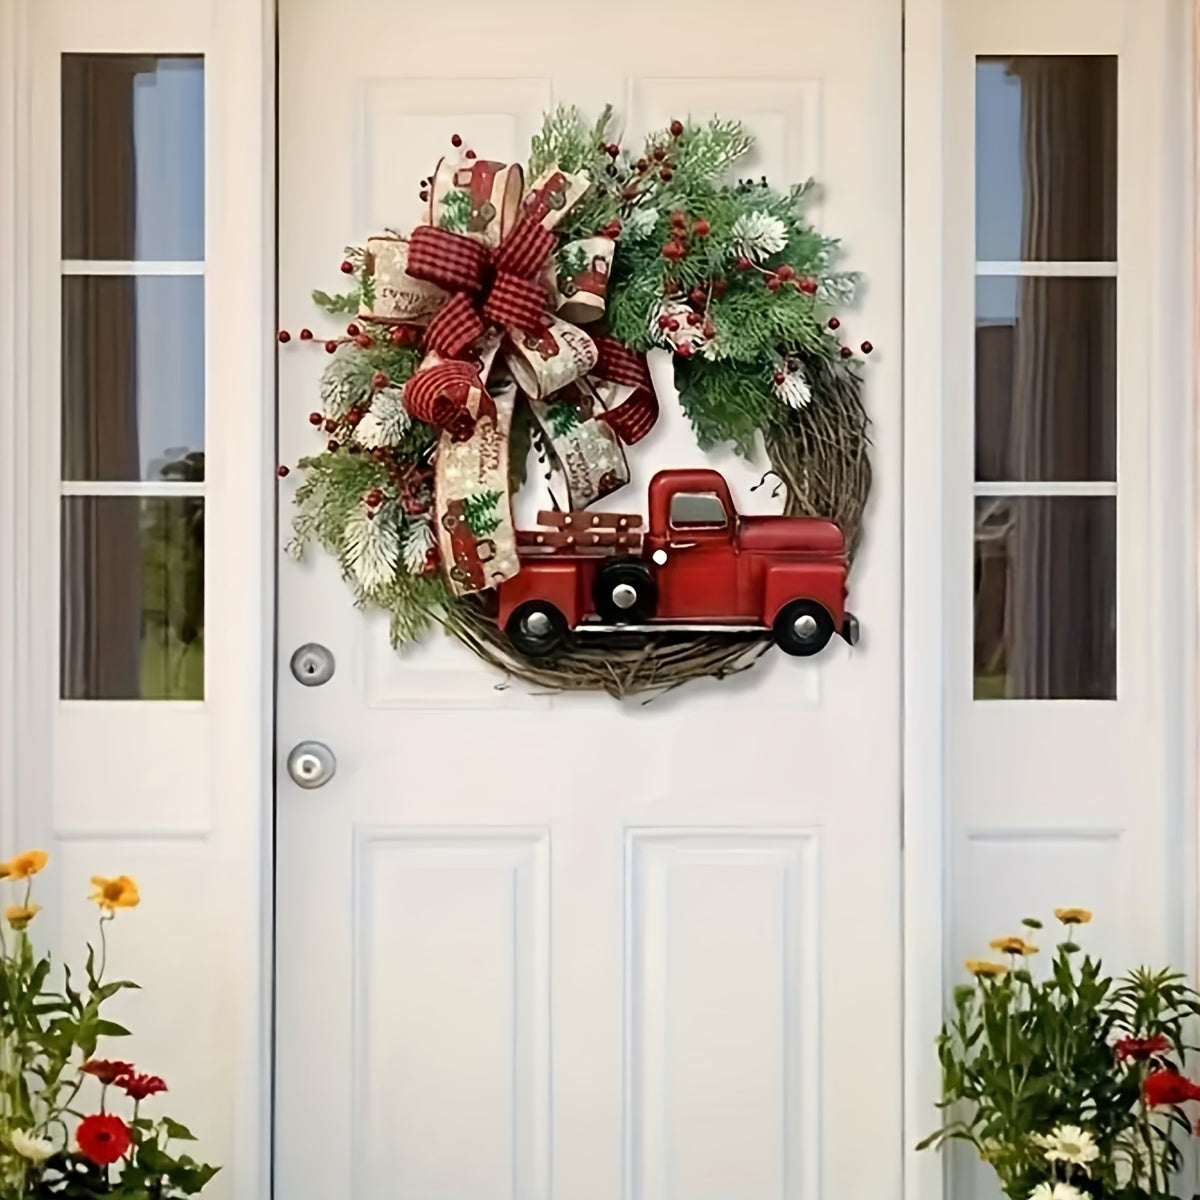 1pc, Christmas Artificial Wreath Red Truck Decoration, Large Door Front Wreath, Door Hanging, Christmas Decorations, Home Decoration Wreath, Christmas Decor Supplies, Holiday Decor